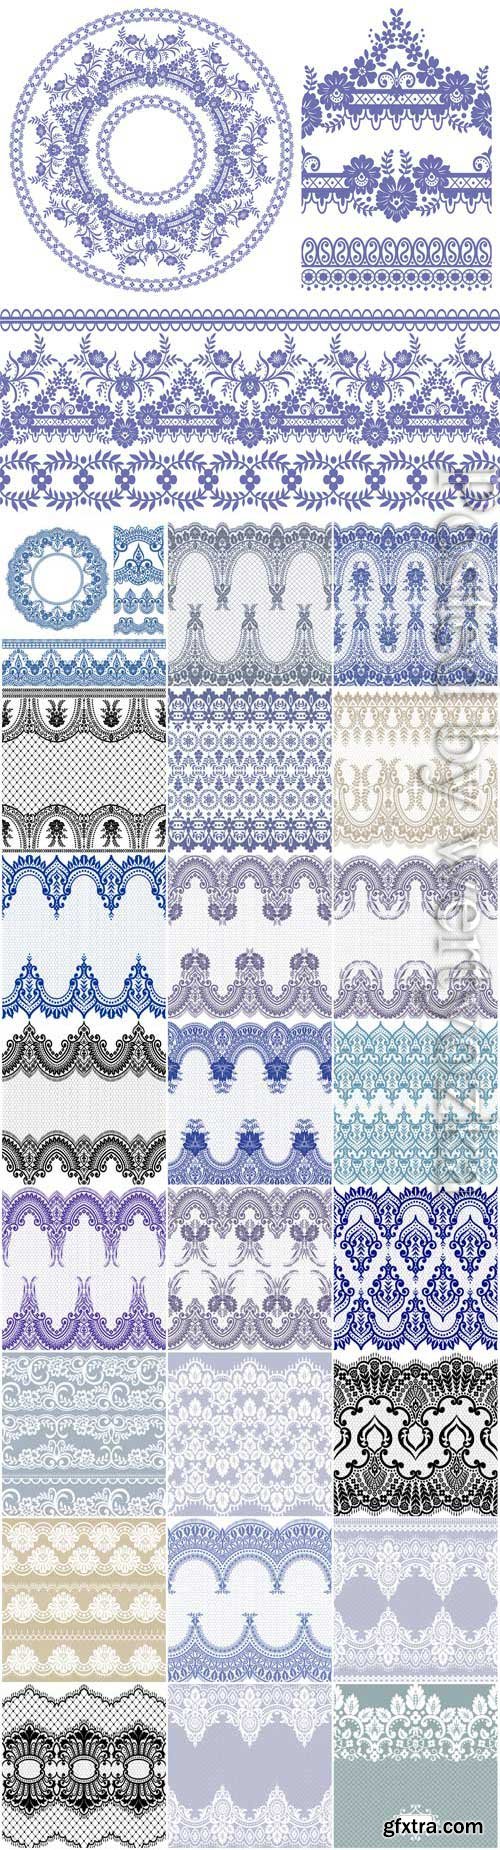 Backgrounds with lace beautiful patterns in vector